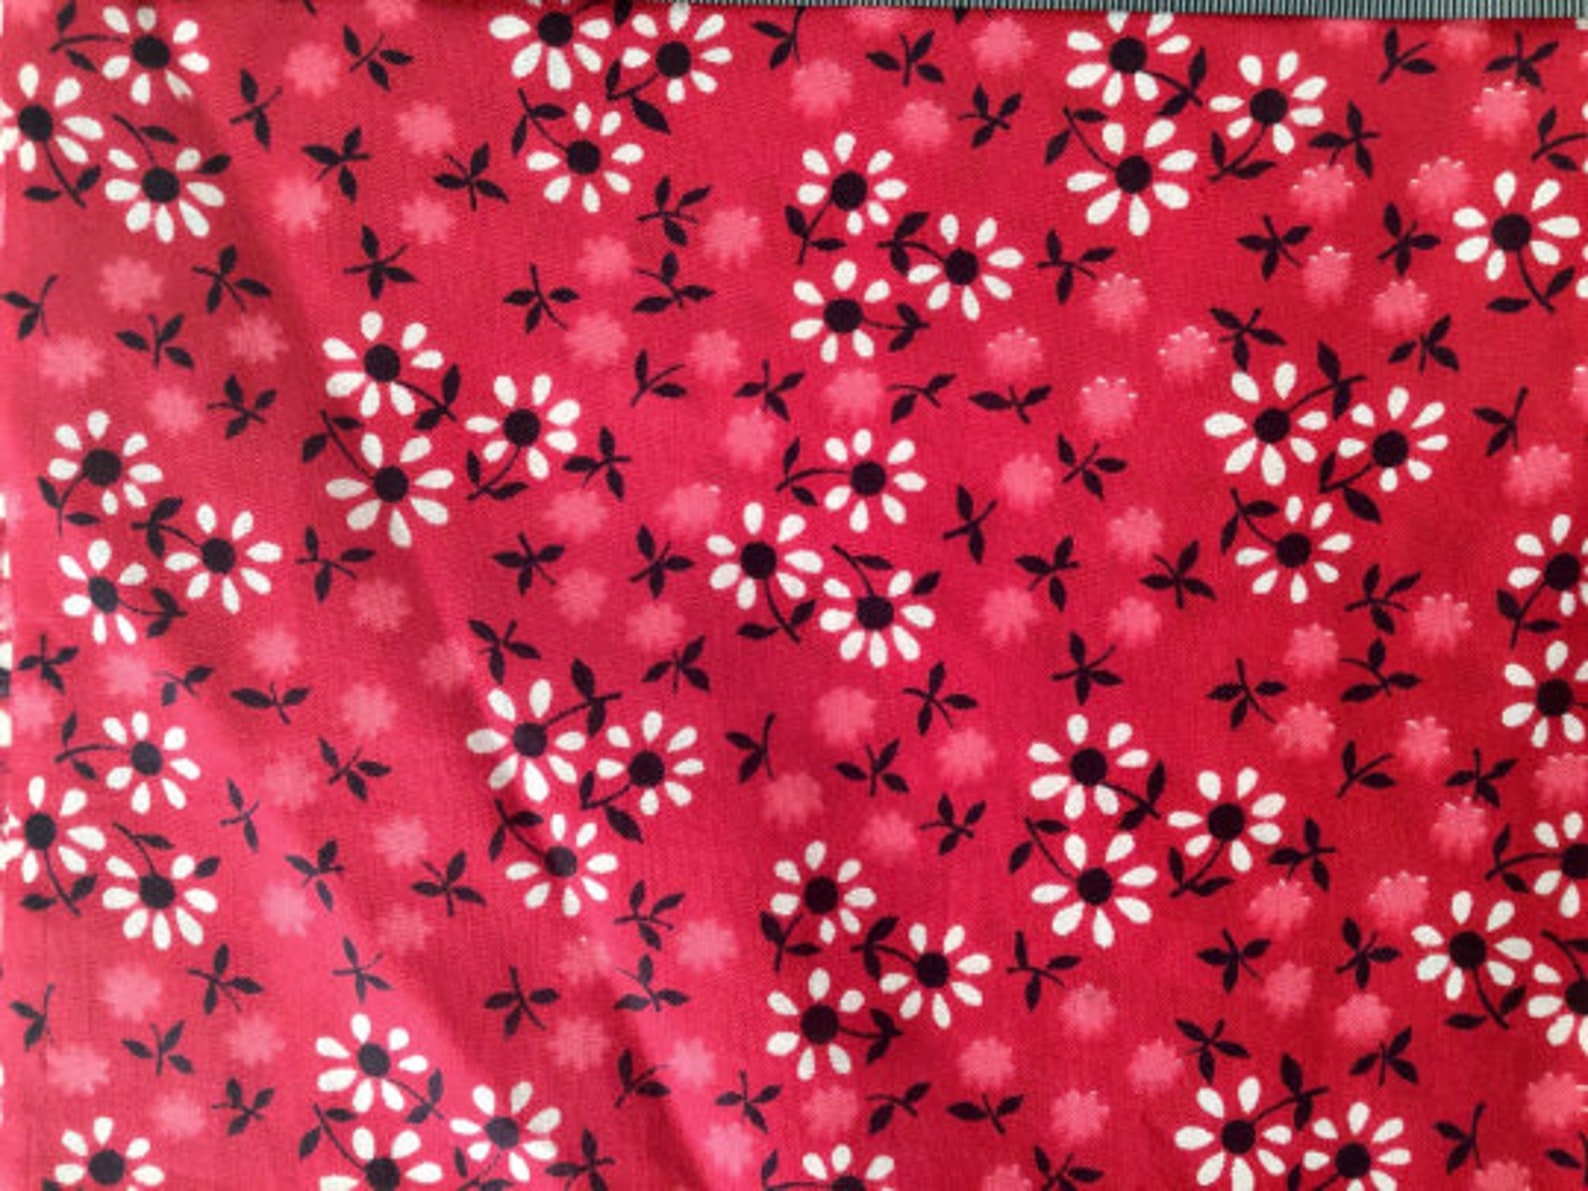 Vintage 1970s Fuchsia Pink White & Black Floral Fabric, Ditsy All Over Tossed Floral Poly Cotton Quilting or Sewing Fabric, 6+ Yards